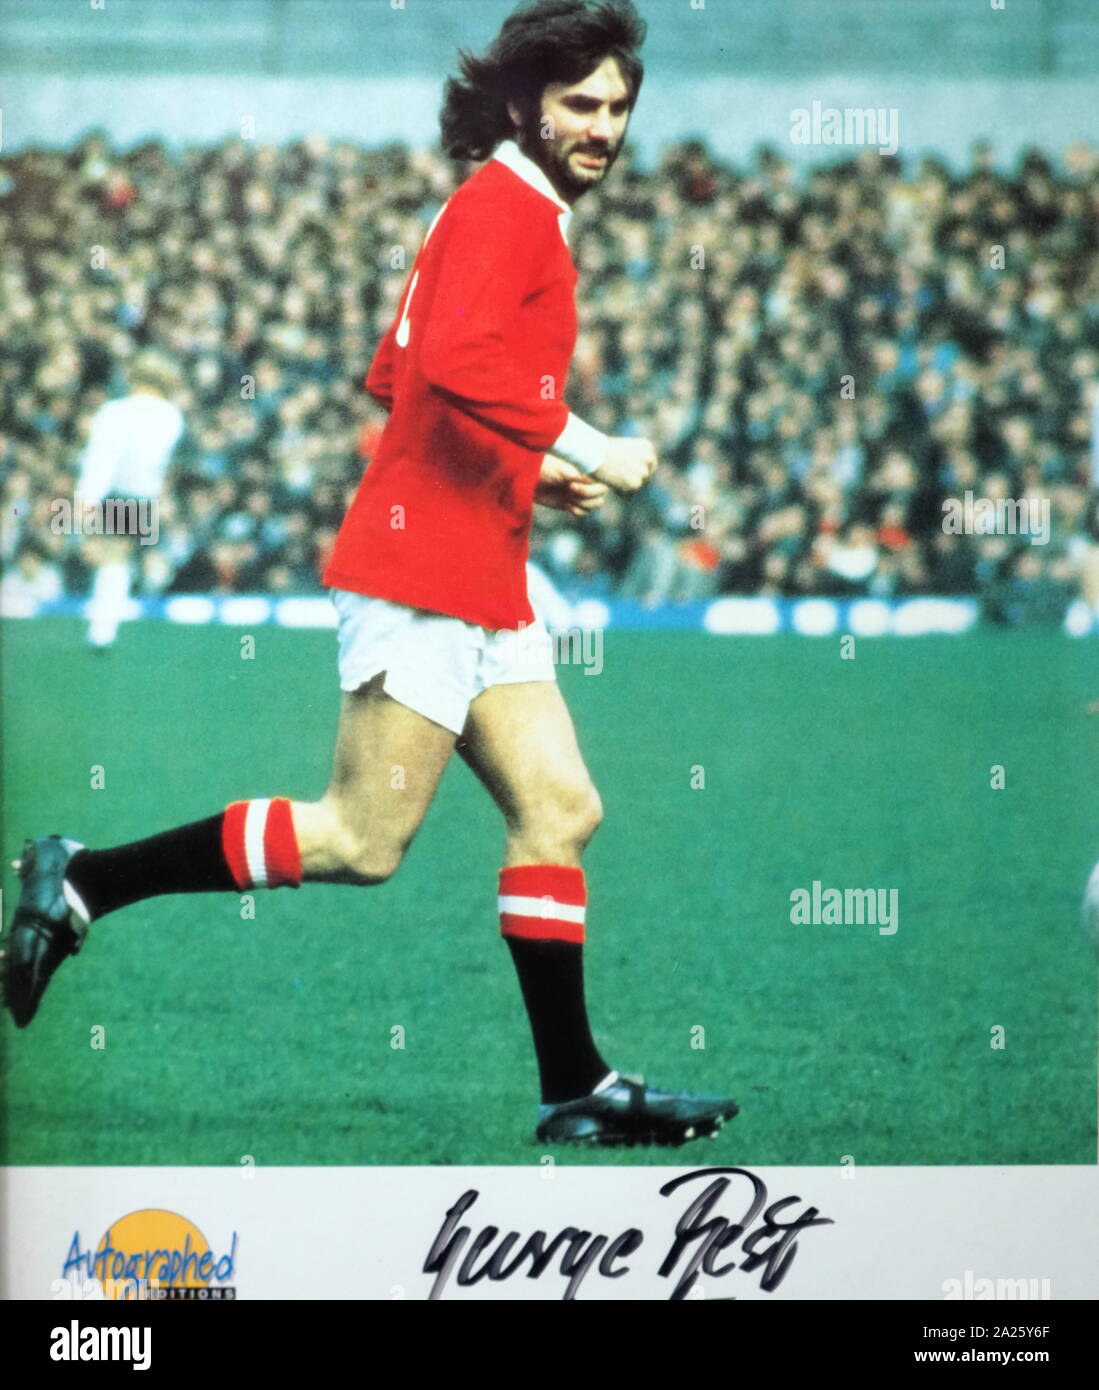 An autographed photograph of George Best. George Best (1946-2005) a Northern Irish professional footballer who spent most of his career at Manchester United. Stock Photo